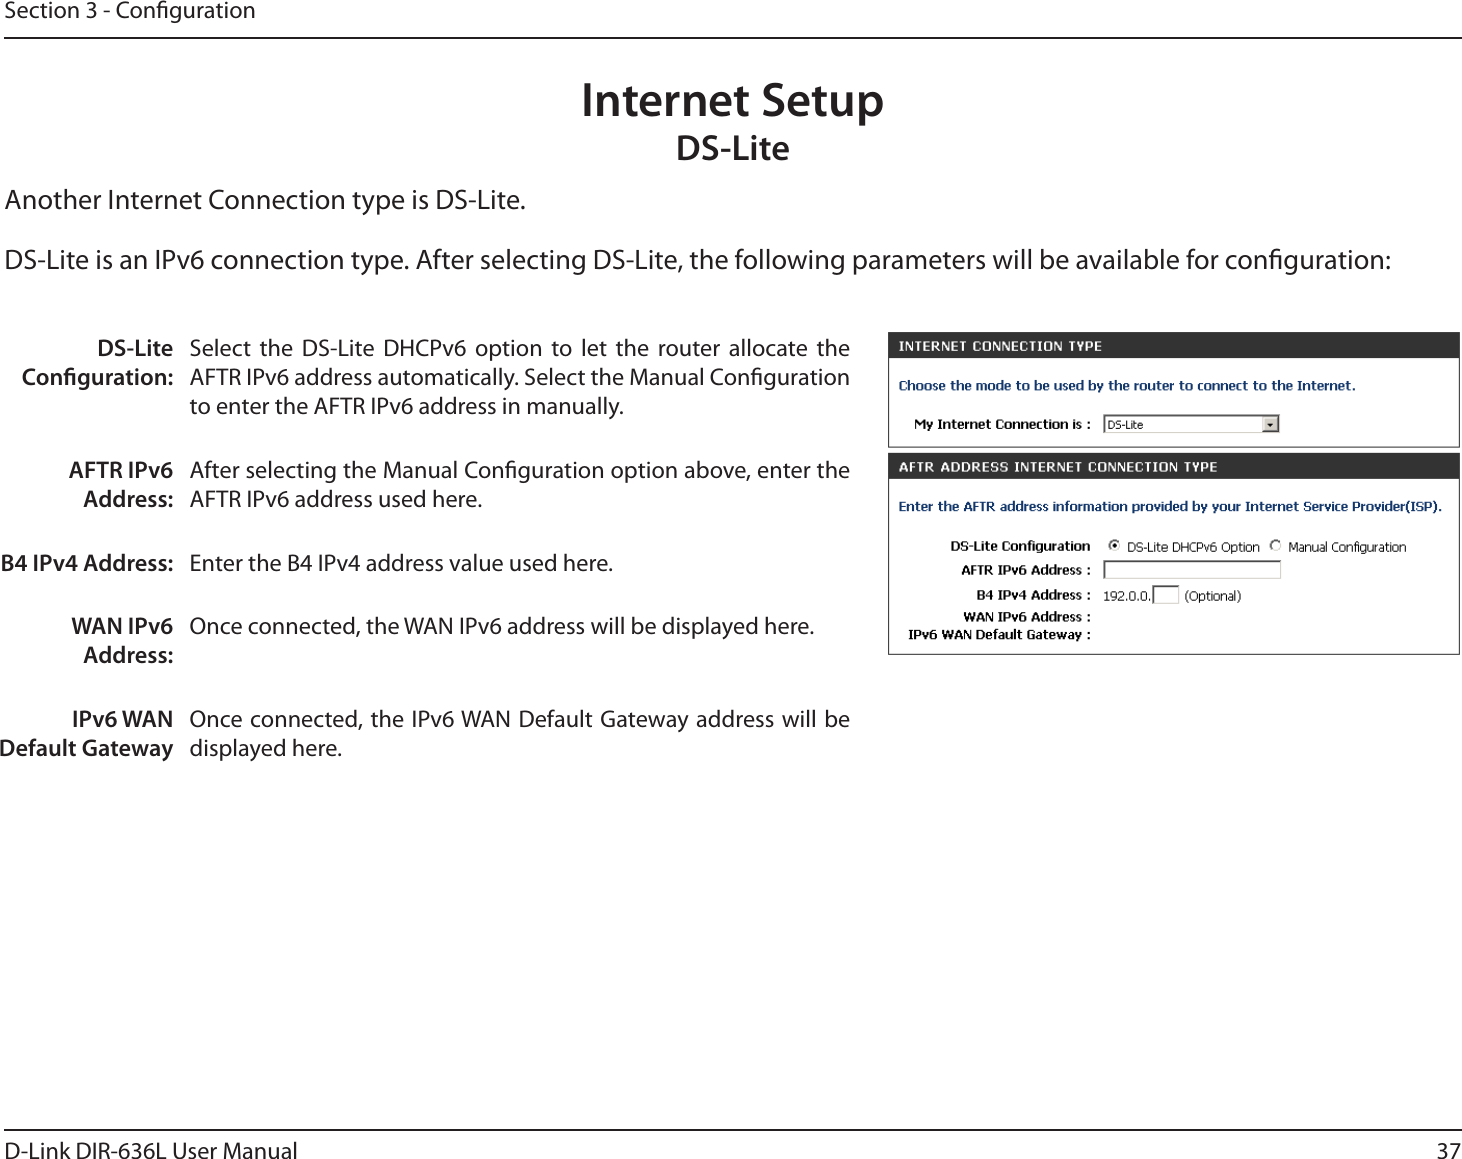 37D-Link DIR-636L User ManualSection 3 - CongurationInternet SetupDS-LiteAnother Internet Connection type is DS-Lite.DS-Lite Conguration:Select the DS-Lite DHCPv6 option to let the router allocate the AFTR IPv6 address automatically. Select the Manual Conguration to enter the AFTR IPv6 address in manually.AFTR IPv6 Address:After selecting the Manual Conguration option above, enter the AFTR IPv6 address used here.B4 IPv4 Address: Enter the B4 IPv4 address value used here.WAN IPv6 Address:Once connected, the WAN IPv6 address will be displayed here.IPv6 WAN Default GatewayOnce connected, the IPv6 WAN Default Gateway address will be displayed here.DS-Lite is an IPv6 connection type. After selecting DS-Lite, the following parameters will be available for conguration: